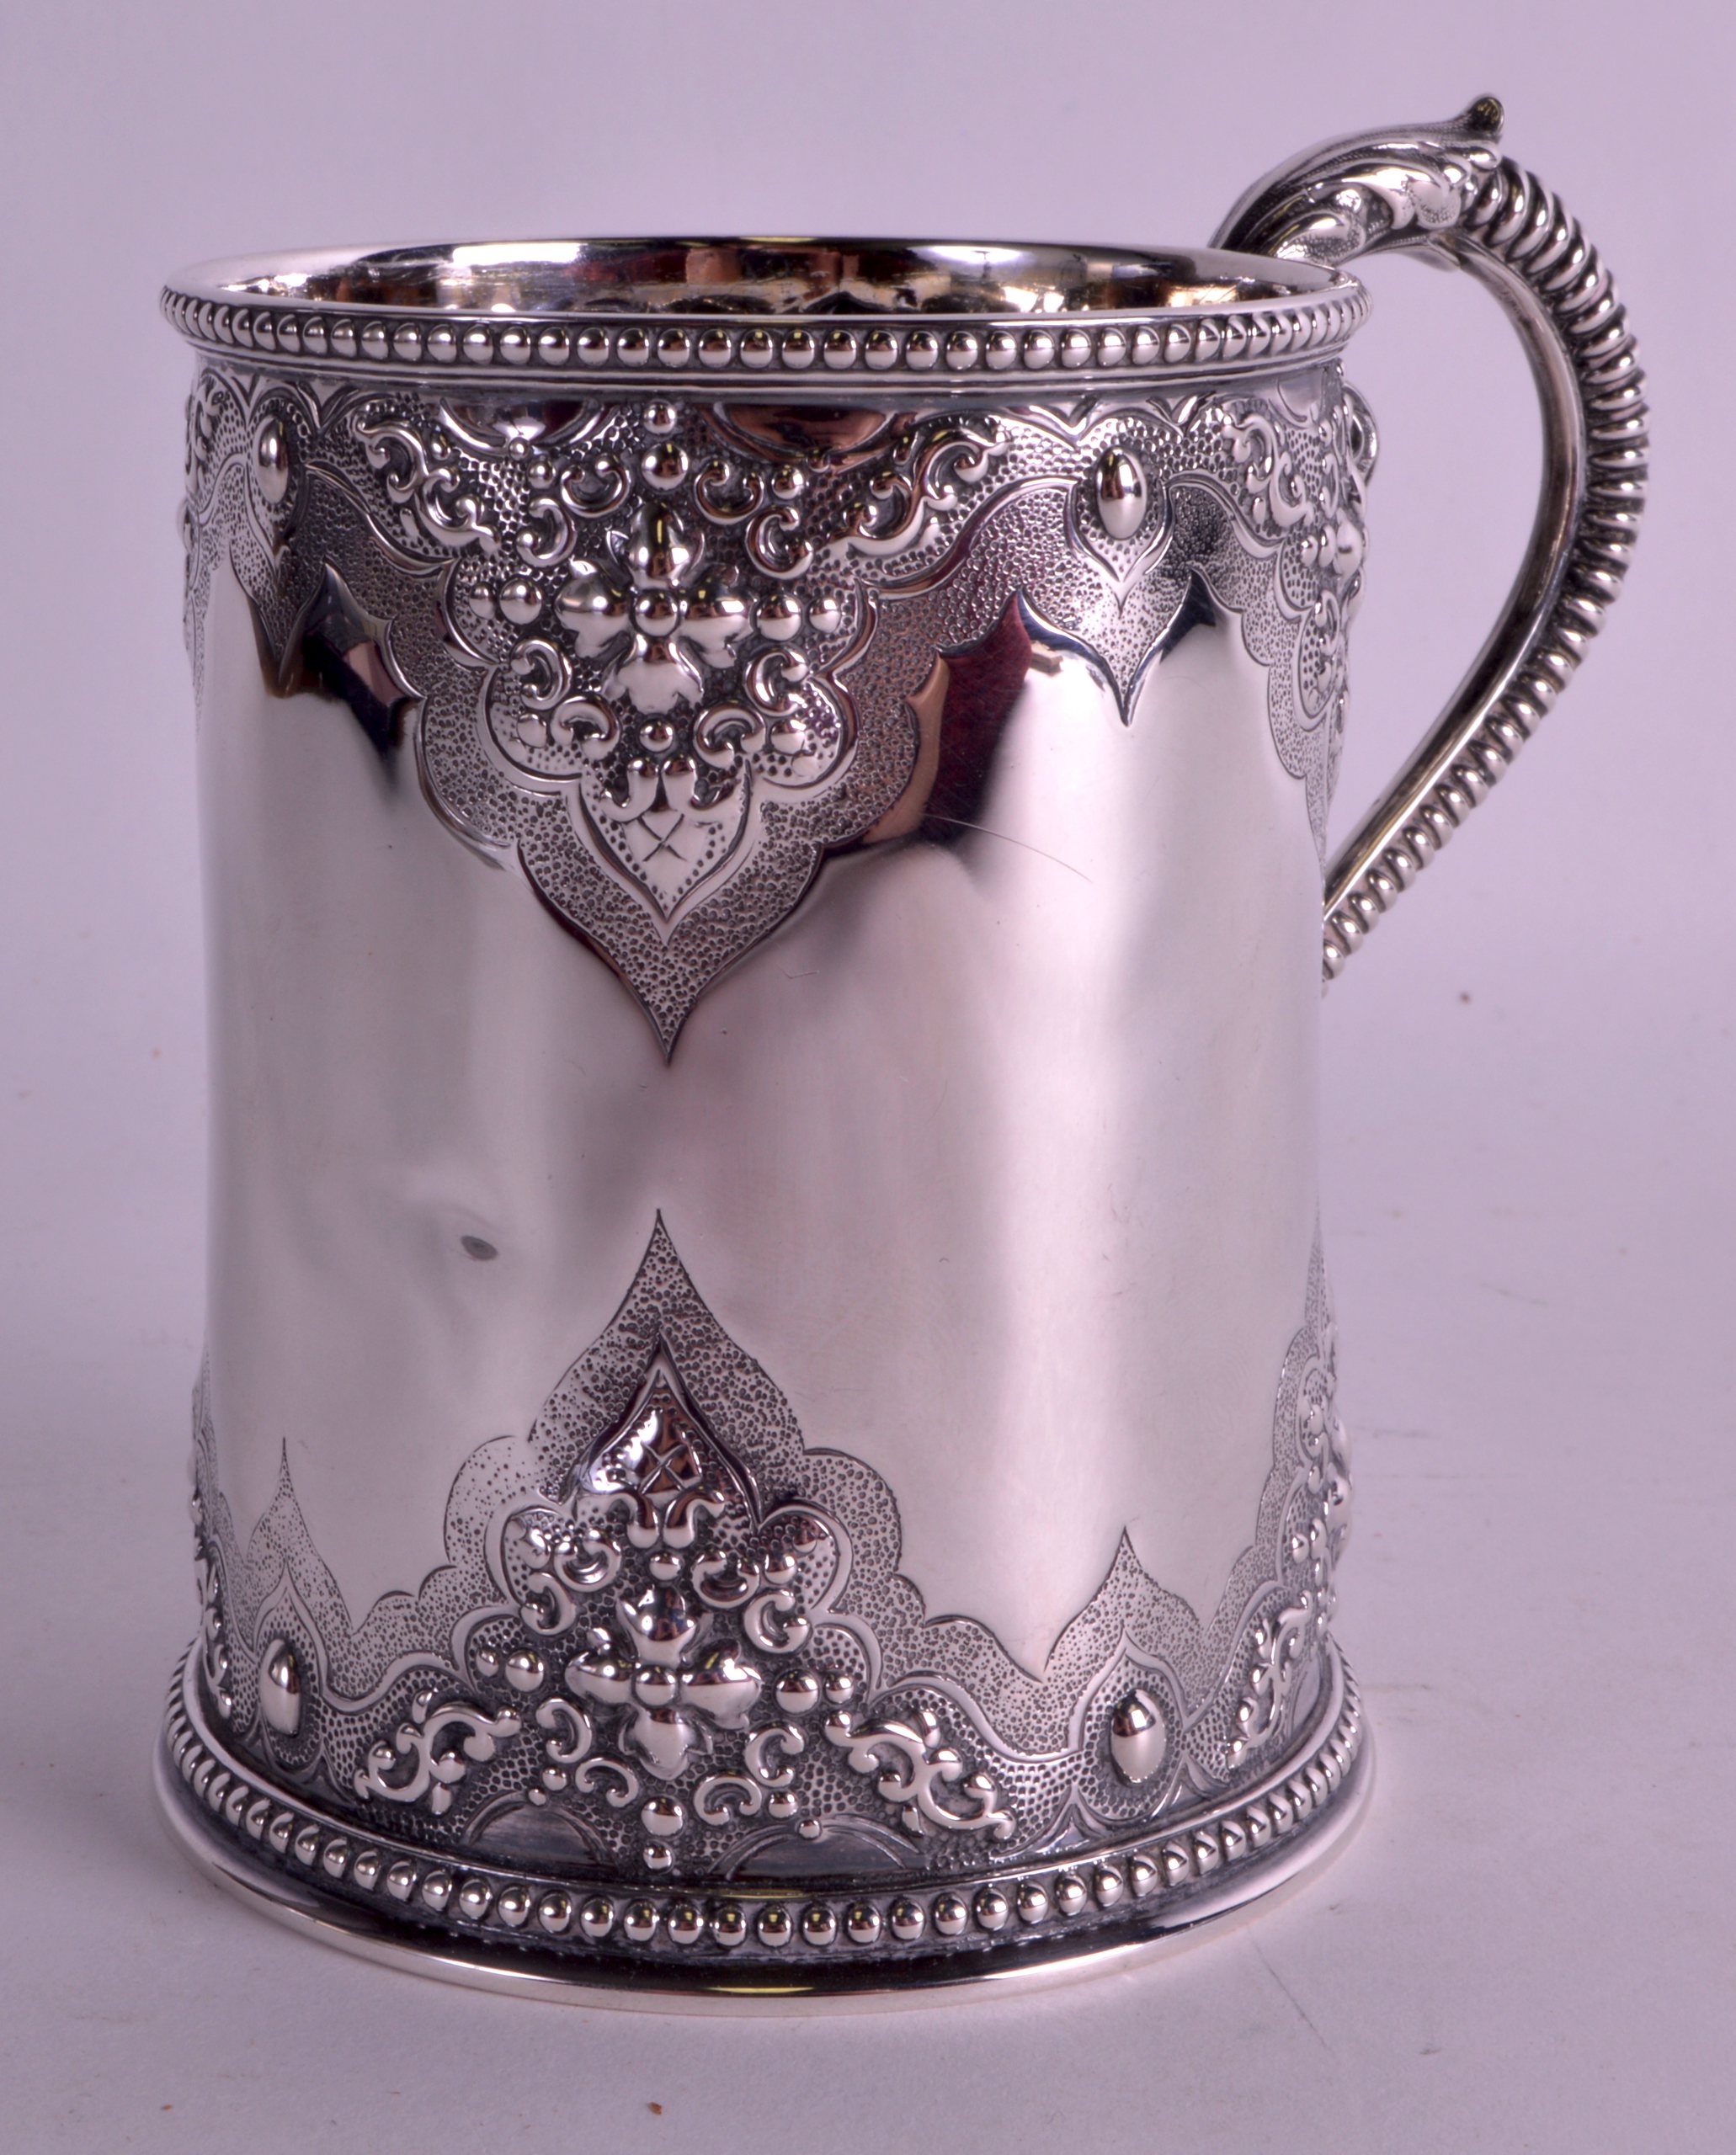 A LOVELY VICTORIAN SILVER CHRISTENING MUG decorated with acanthus and flowers in relief, together